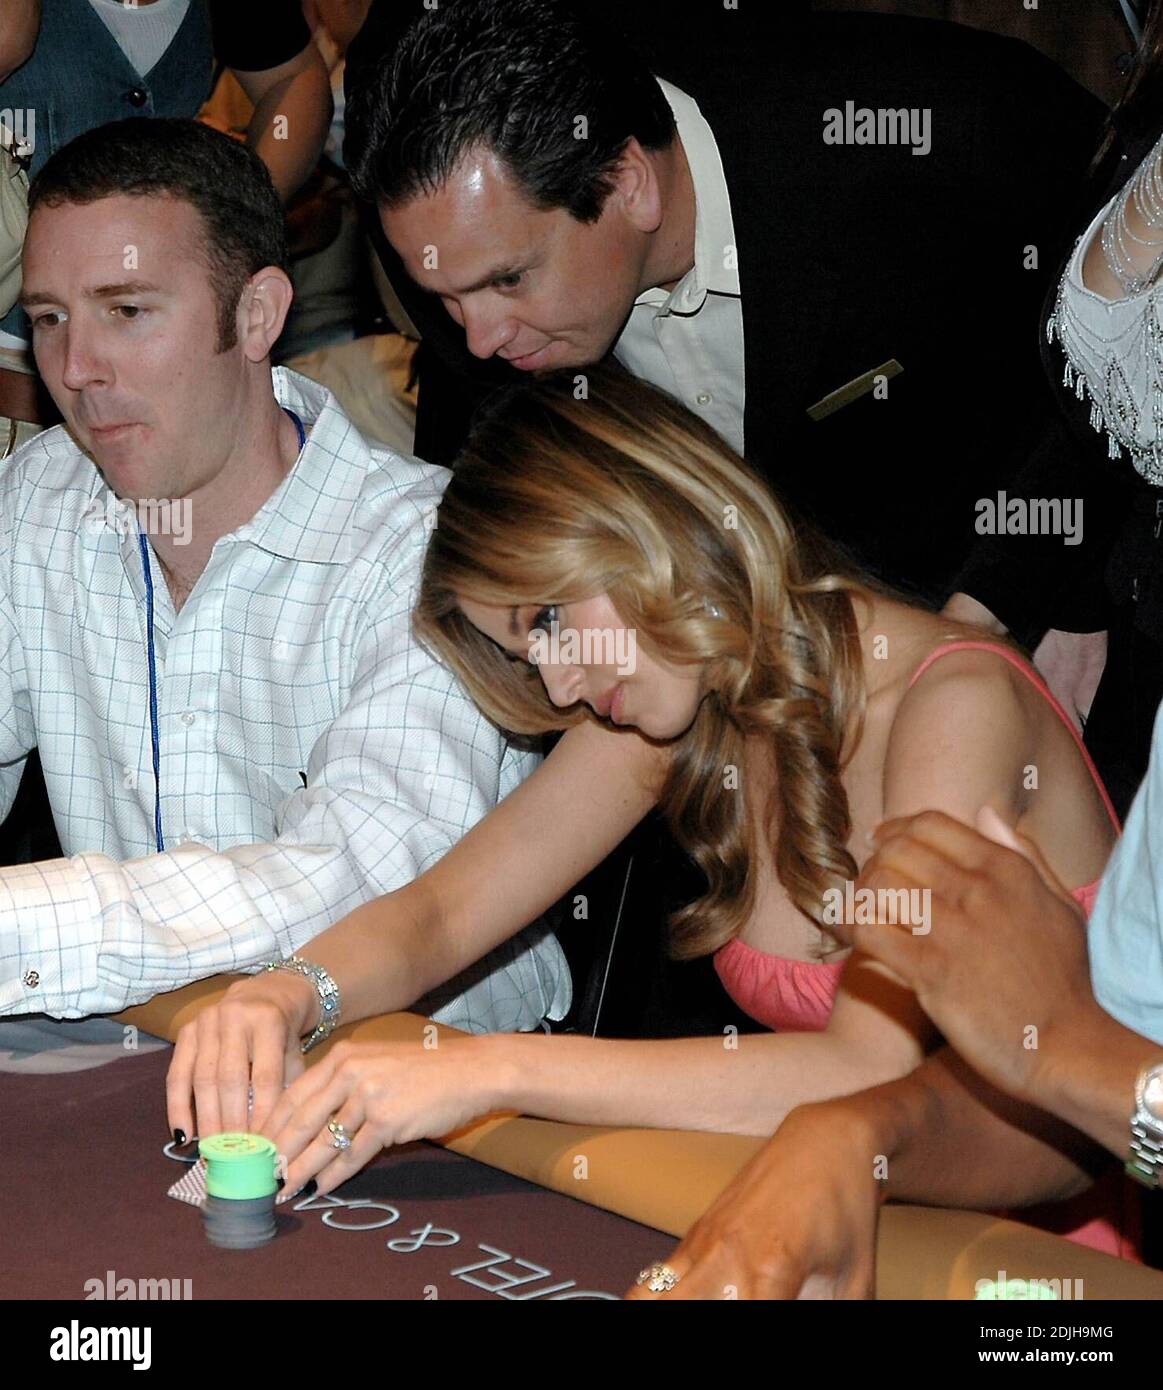 The first annual Head to Hollywood Celebrity Charity Poker Tournament and Auction at The Joint inside the Hard Rock Hotel & Casino June 3, 2006 in Las Vegas, Nevada. Celebrity attendees included Carmen Electra, Stormy Daniels, Montel Williams, Shannon Elizabeth, Chris Masterson, Laura Prepon, James Lesure and Tichina Arnold. The charity, founded by Electra and Us Weekly editor Ken Baker, provides for brain tumor survivors and their families. Las Vegas, Nevada. 06/03/06 Stock Photo